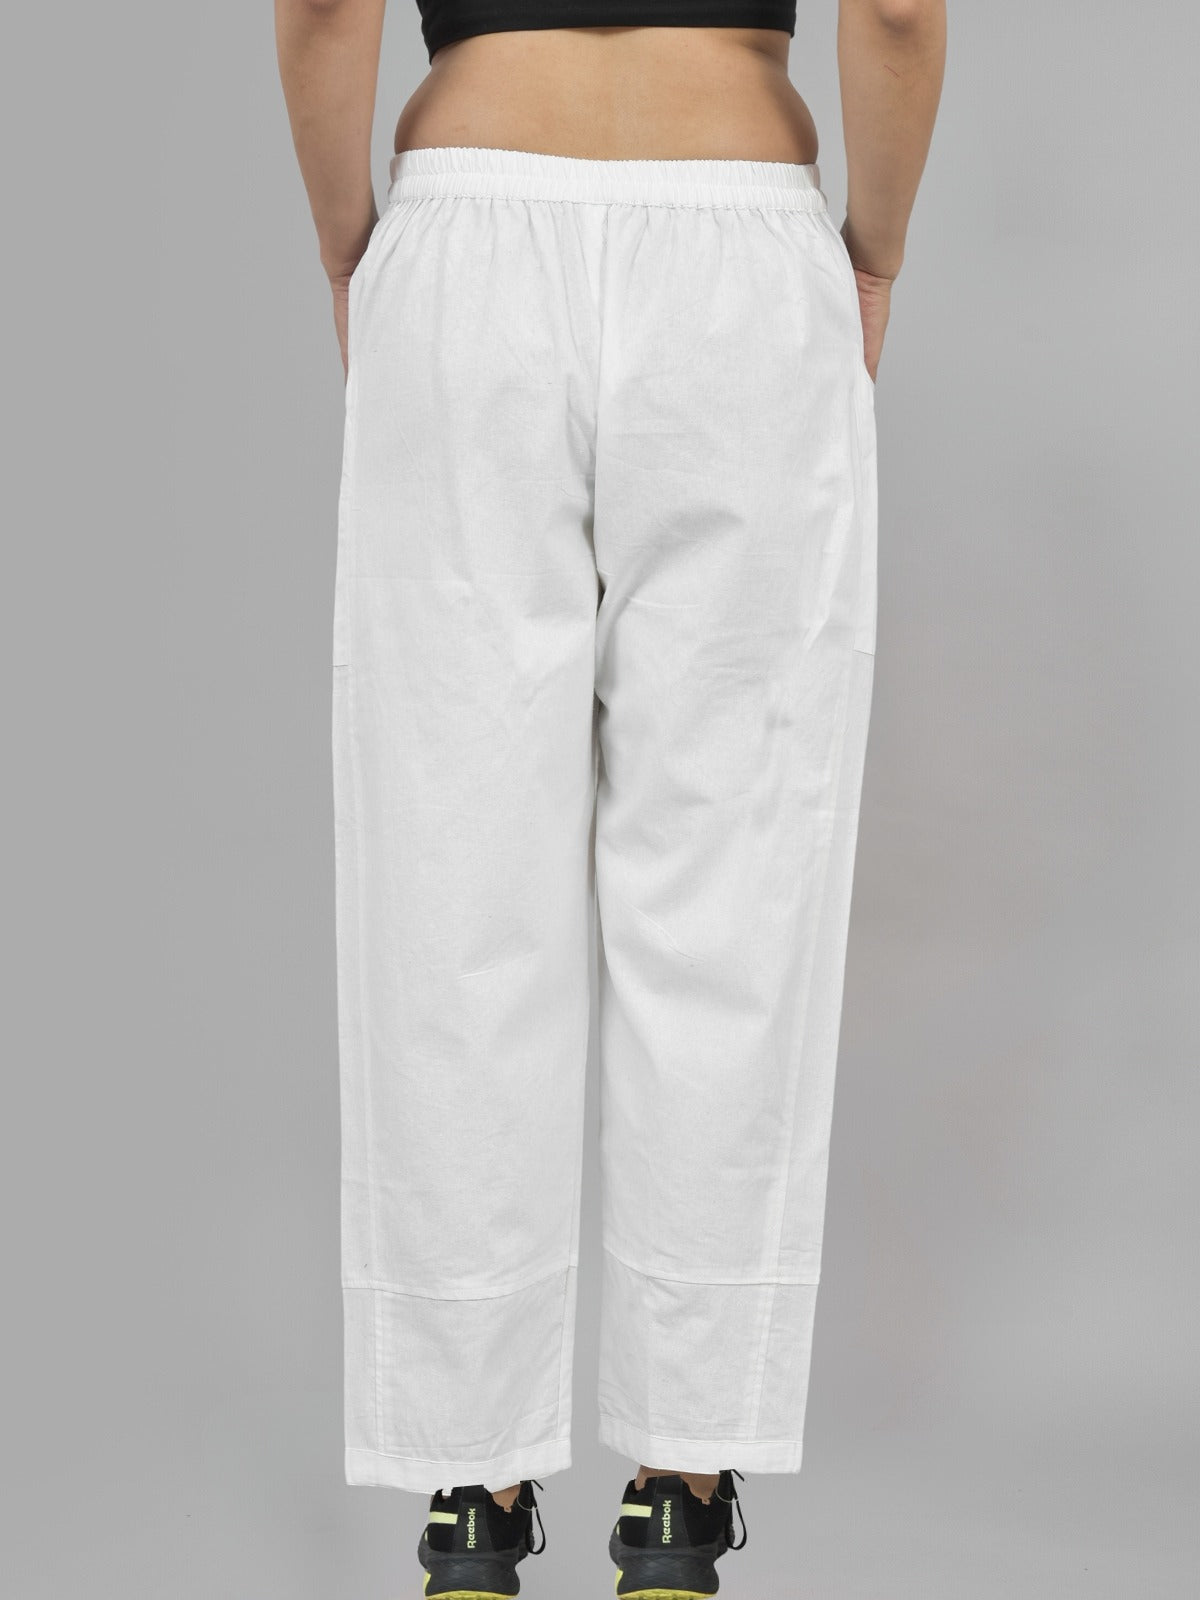 Combo Pack Of Womens White And Beige Side Pocket Straight Cargo Pants